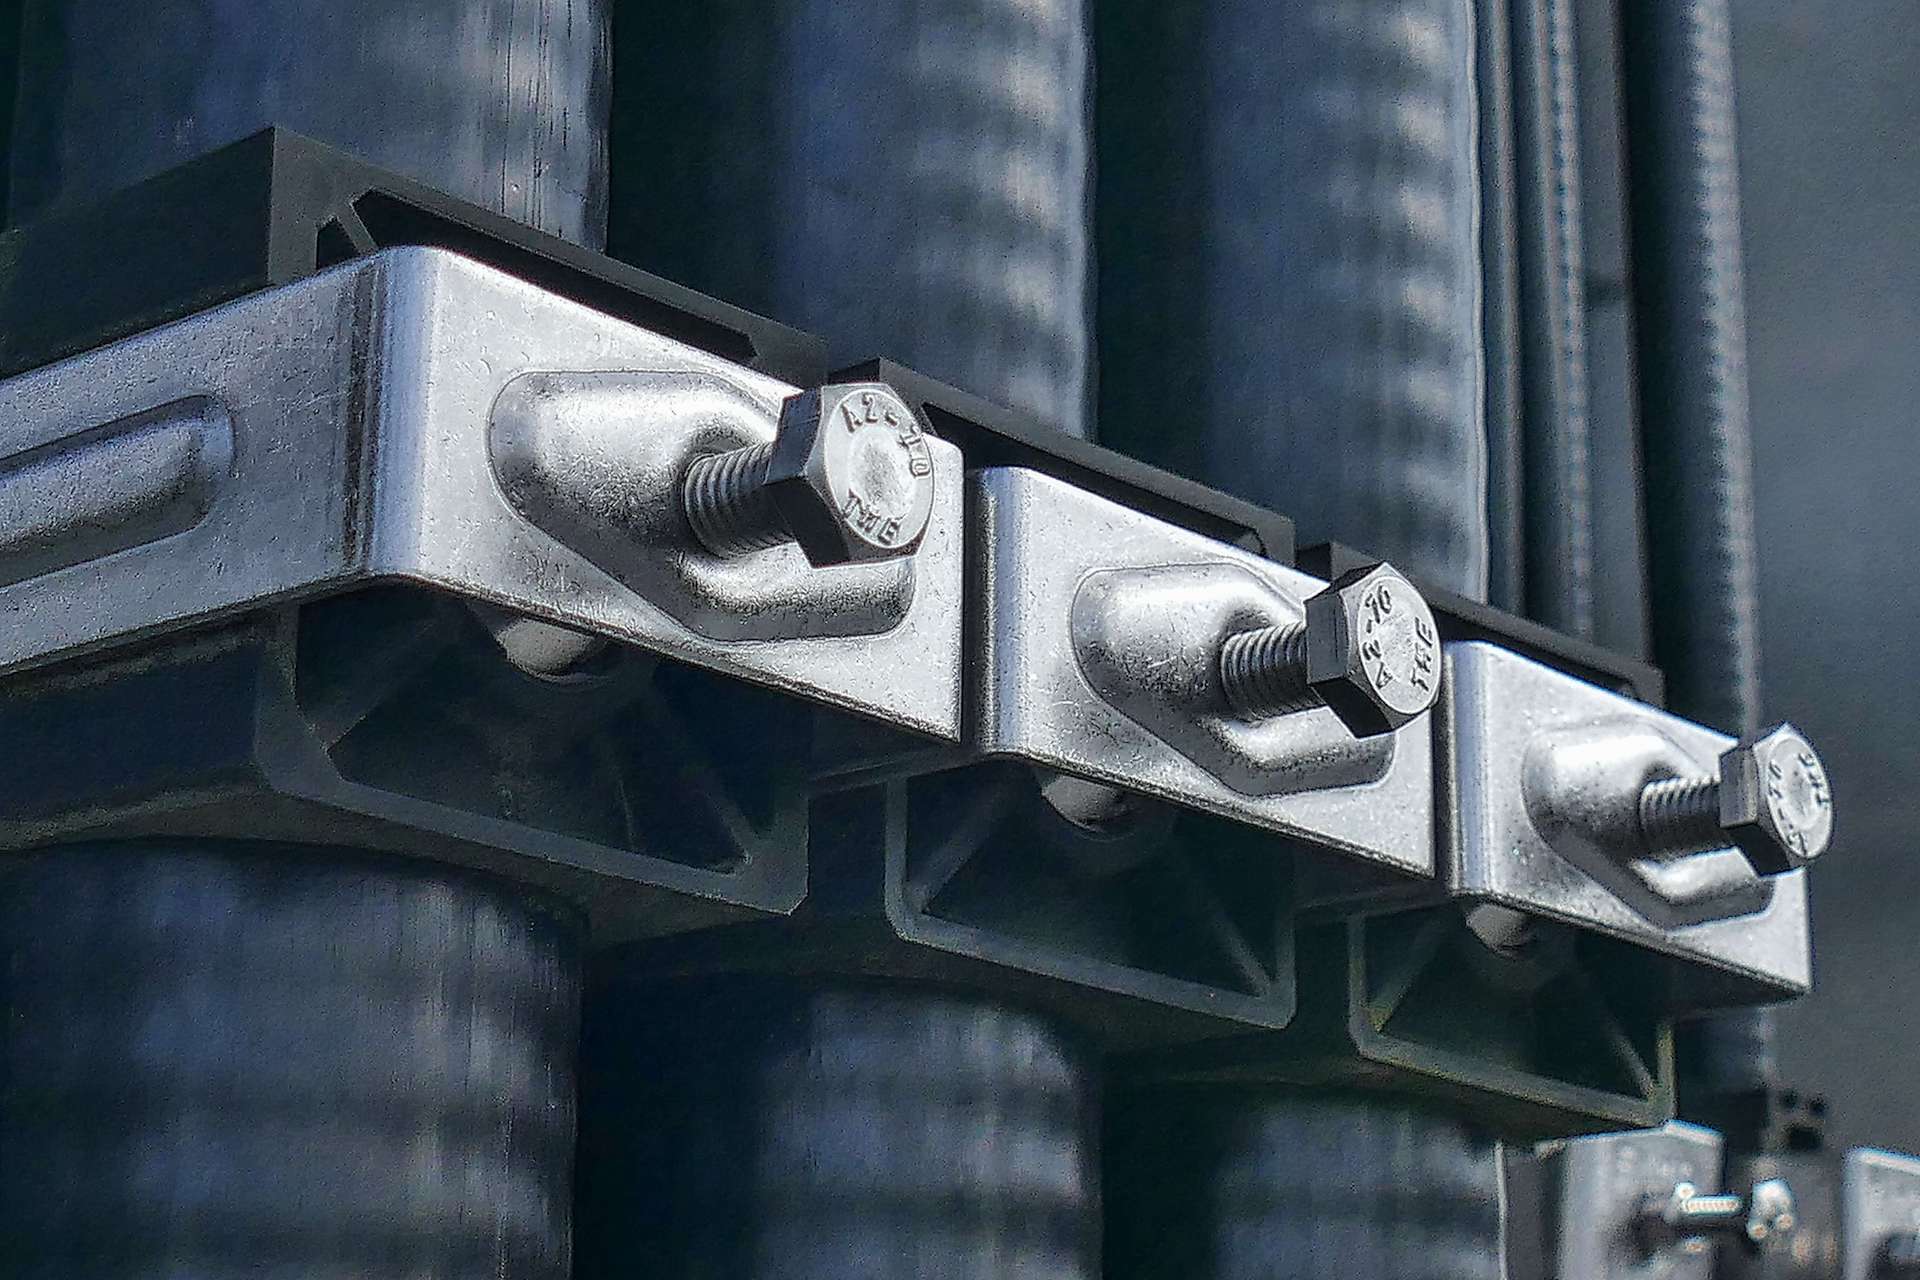 Hex setscrews used to fix metal girders together